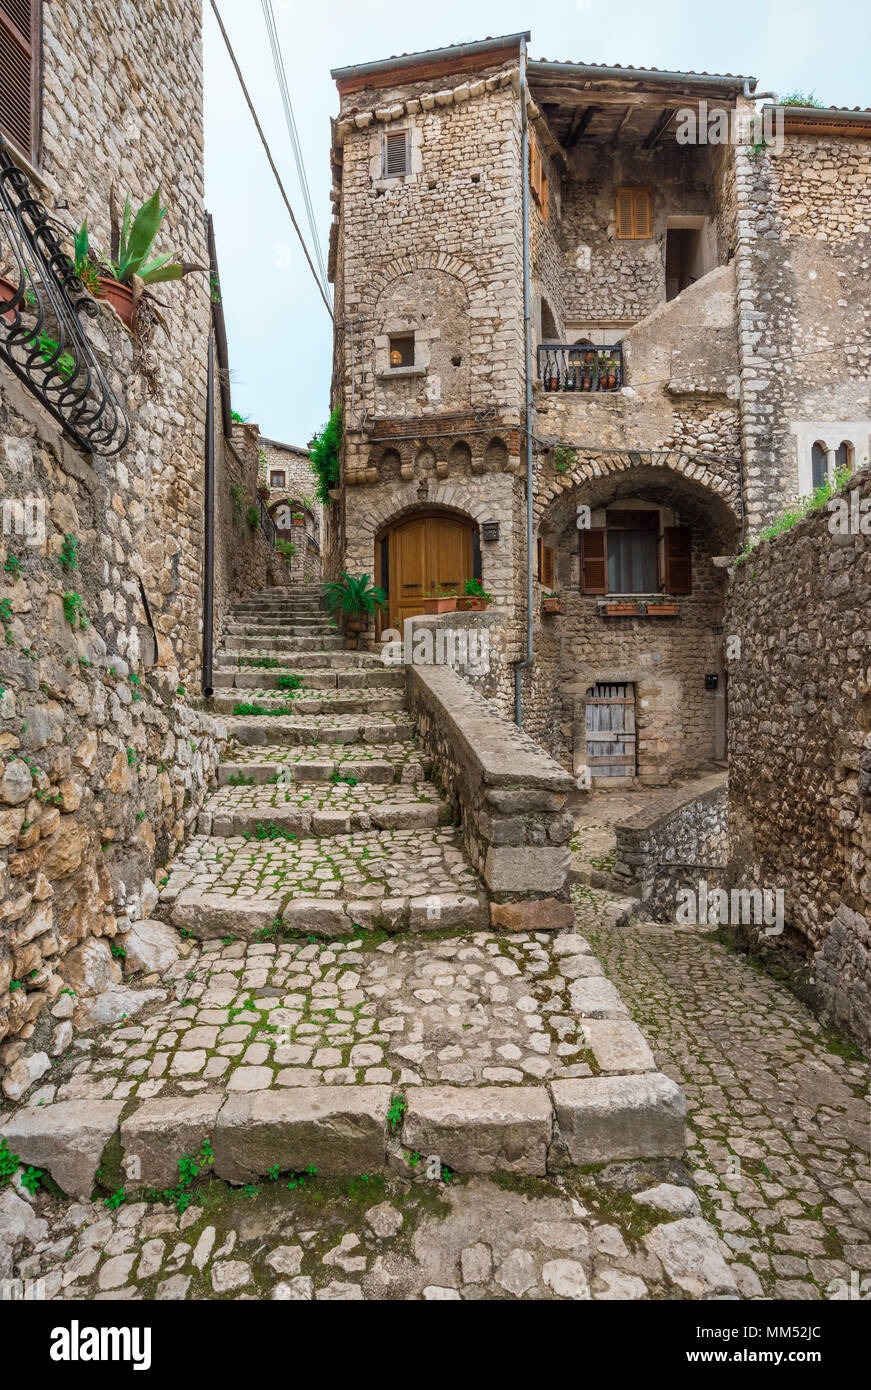 Sermoneta, Italy - A very little and awesome medieval hill town in province of Latina, Lazio region, all in stone with famous Caetani castle Stock Photo